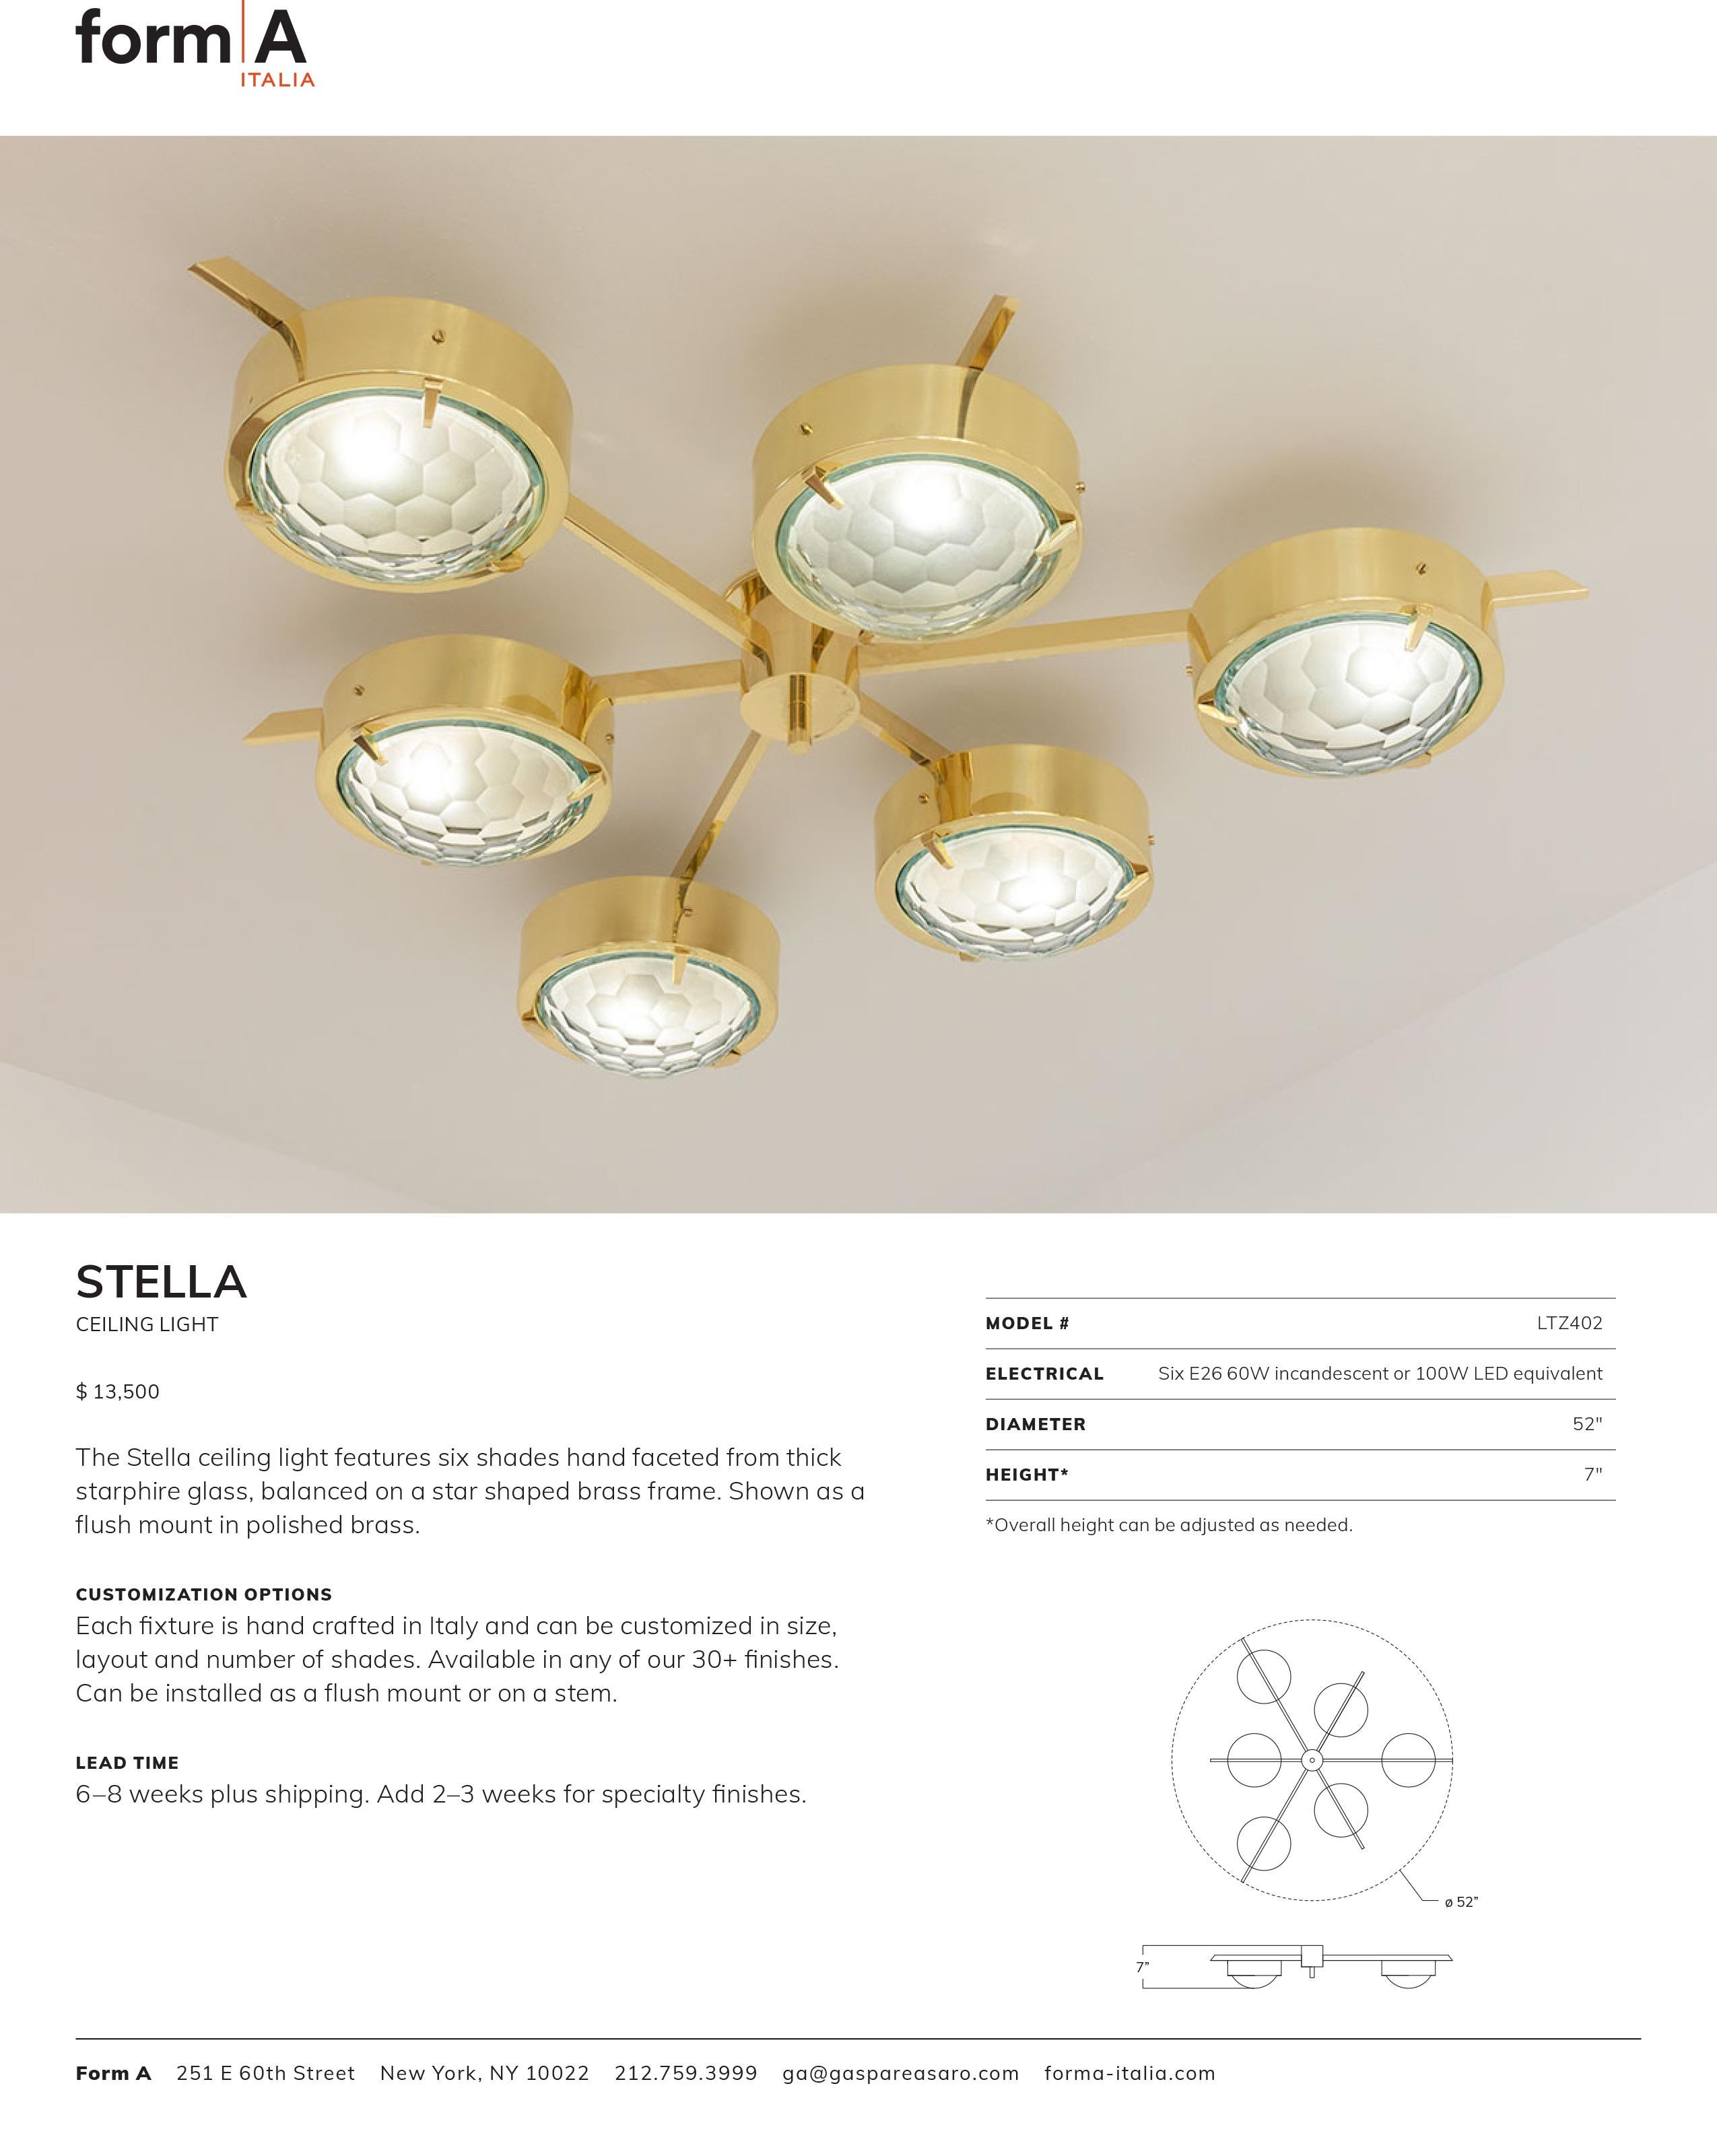 Stella Ceiling Light by form A 2